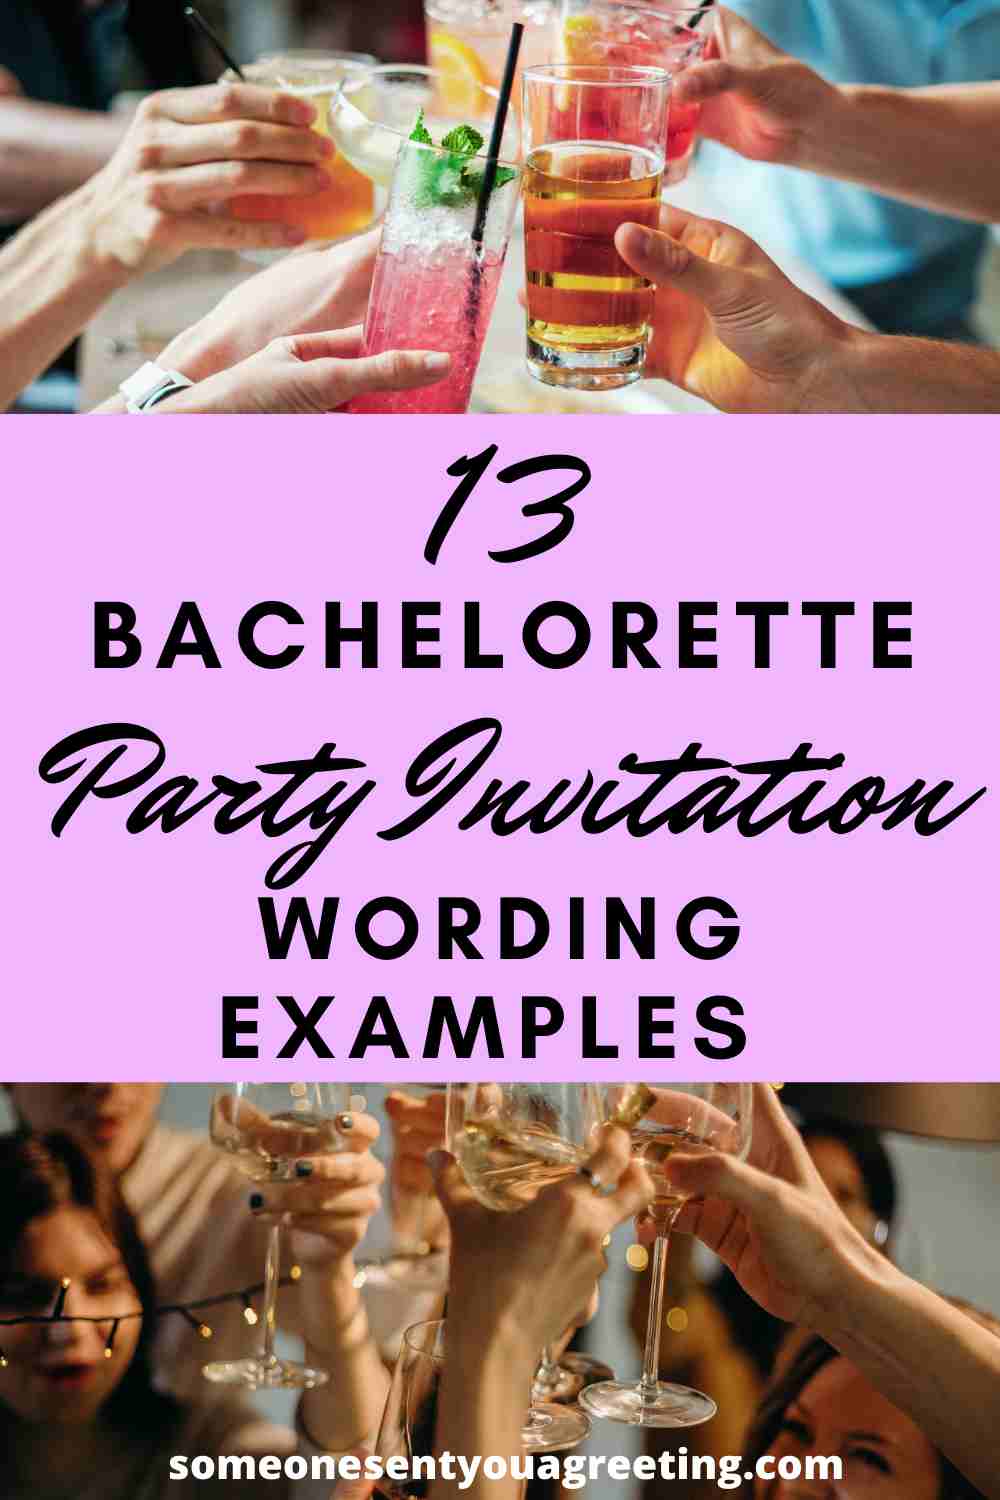 Bachelorette party invitation wording examples